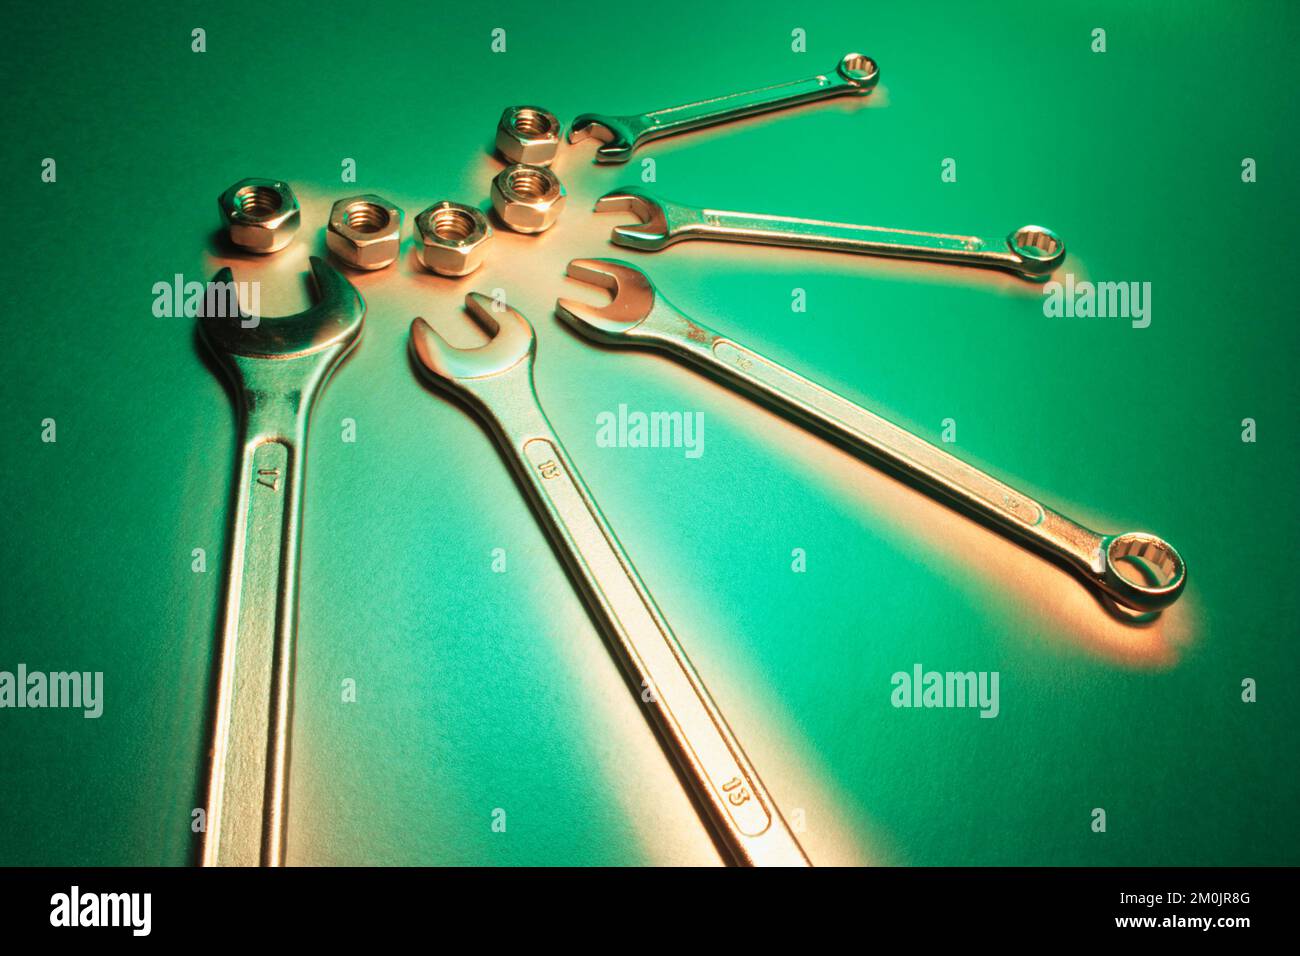 Spanners and Nuts on Green Background Stock Photo